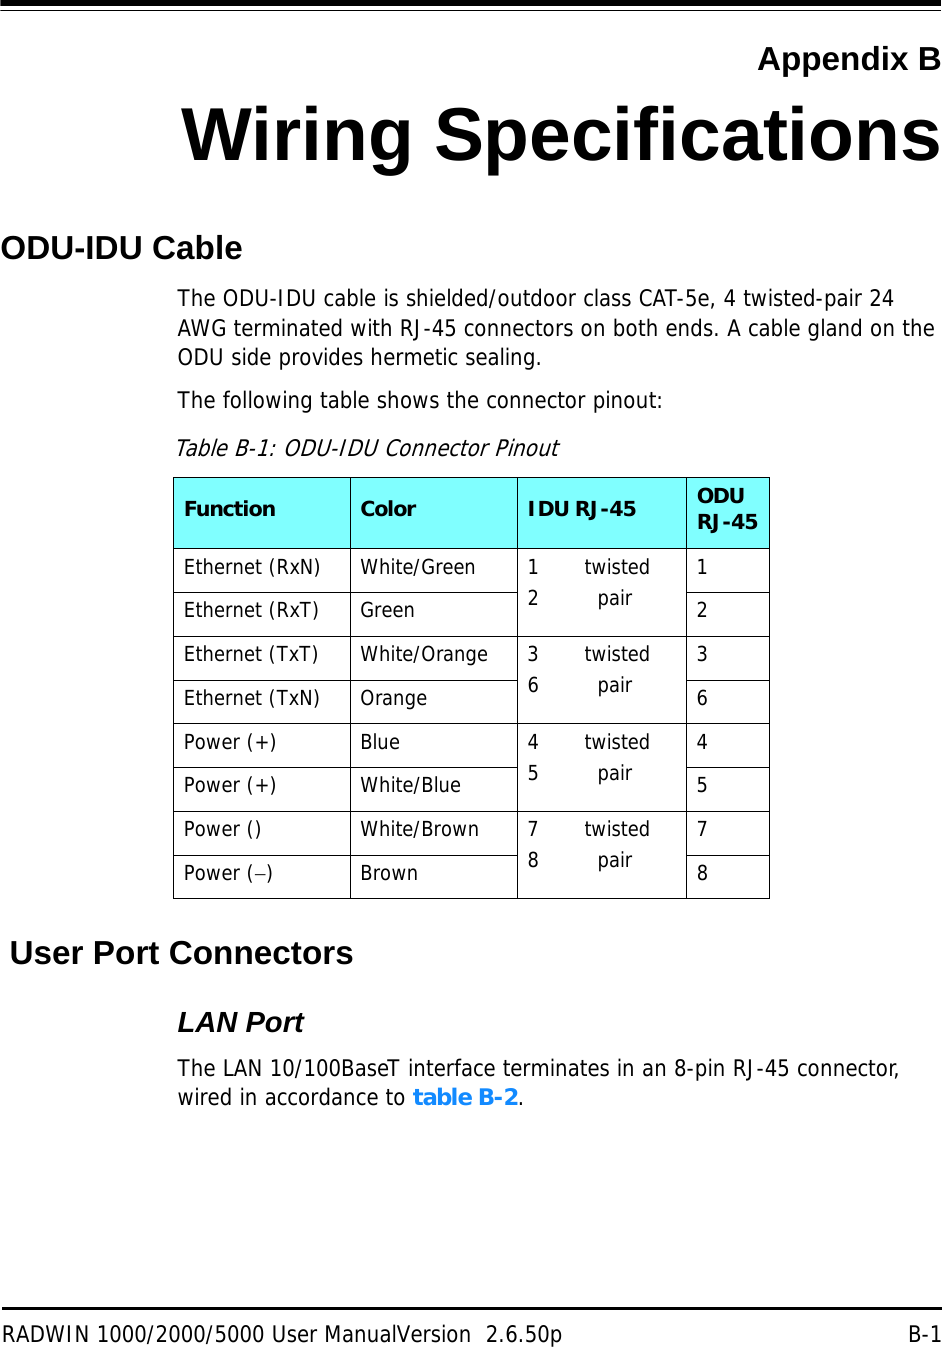 RADWIN 1000/2000/5000 User ManualVersion  2.6.50p B-1Appendix BWiring SpecificationsODU-IDU CableThe ODU-IDU cable is shielded/outdoor class CAT-5e, 4 twisted-pair 24 AWG terminated with RJ-45 connectors on both ends. A cable gland on the ODU side provides hermetic sealing.The following table shows the connector pinout: User Port ConnectorsLAN PortThe LAN 10/100BaseT interface terminates in an 8-pin RJ-45 connector, wired in accordance to table B-2.Table B-1: ODU-IDU Connector PinoutFunction Color IDU RJ-45 ODU RJ-45Ethernet (RxN) White/Green 1       twisted2         pair 1 Ethernet (RxT) Green 2 Ethernet (TxT) White/Orange 3       twisted6         pair 3 Ethernet (TxN) Orange 6 Power (+) Blue 4       twisted5         pair 4 Power (+) White/Blue 5 Power () White/Brown 7       twisted8         pair 7 Power ()Brown 8 